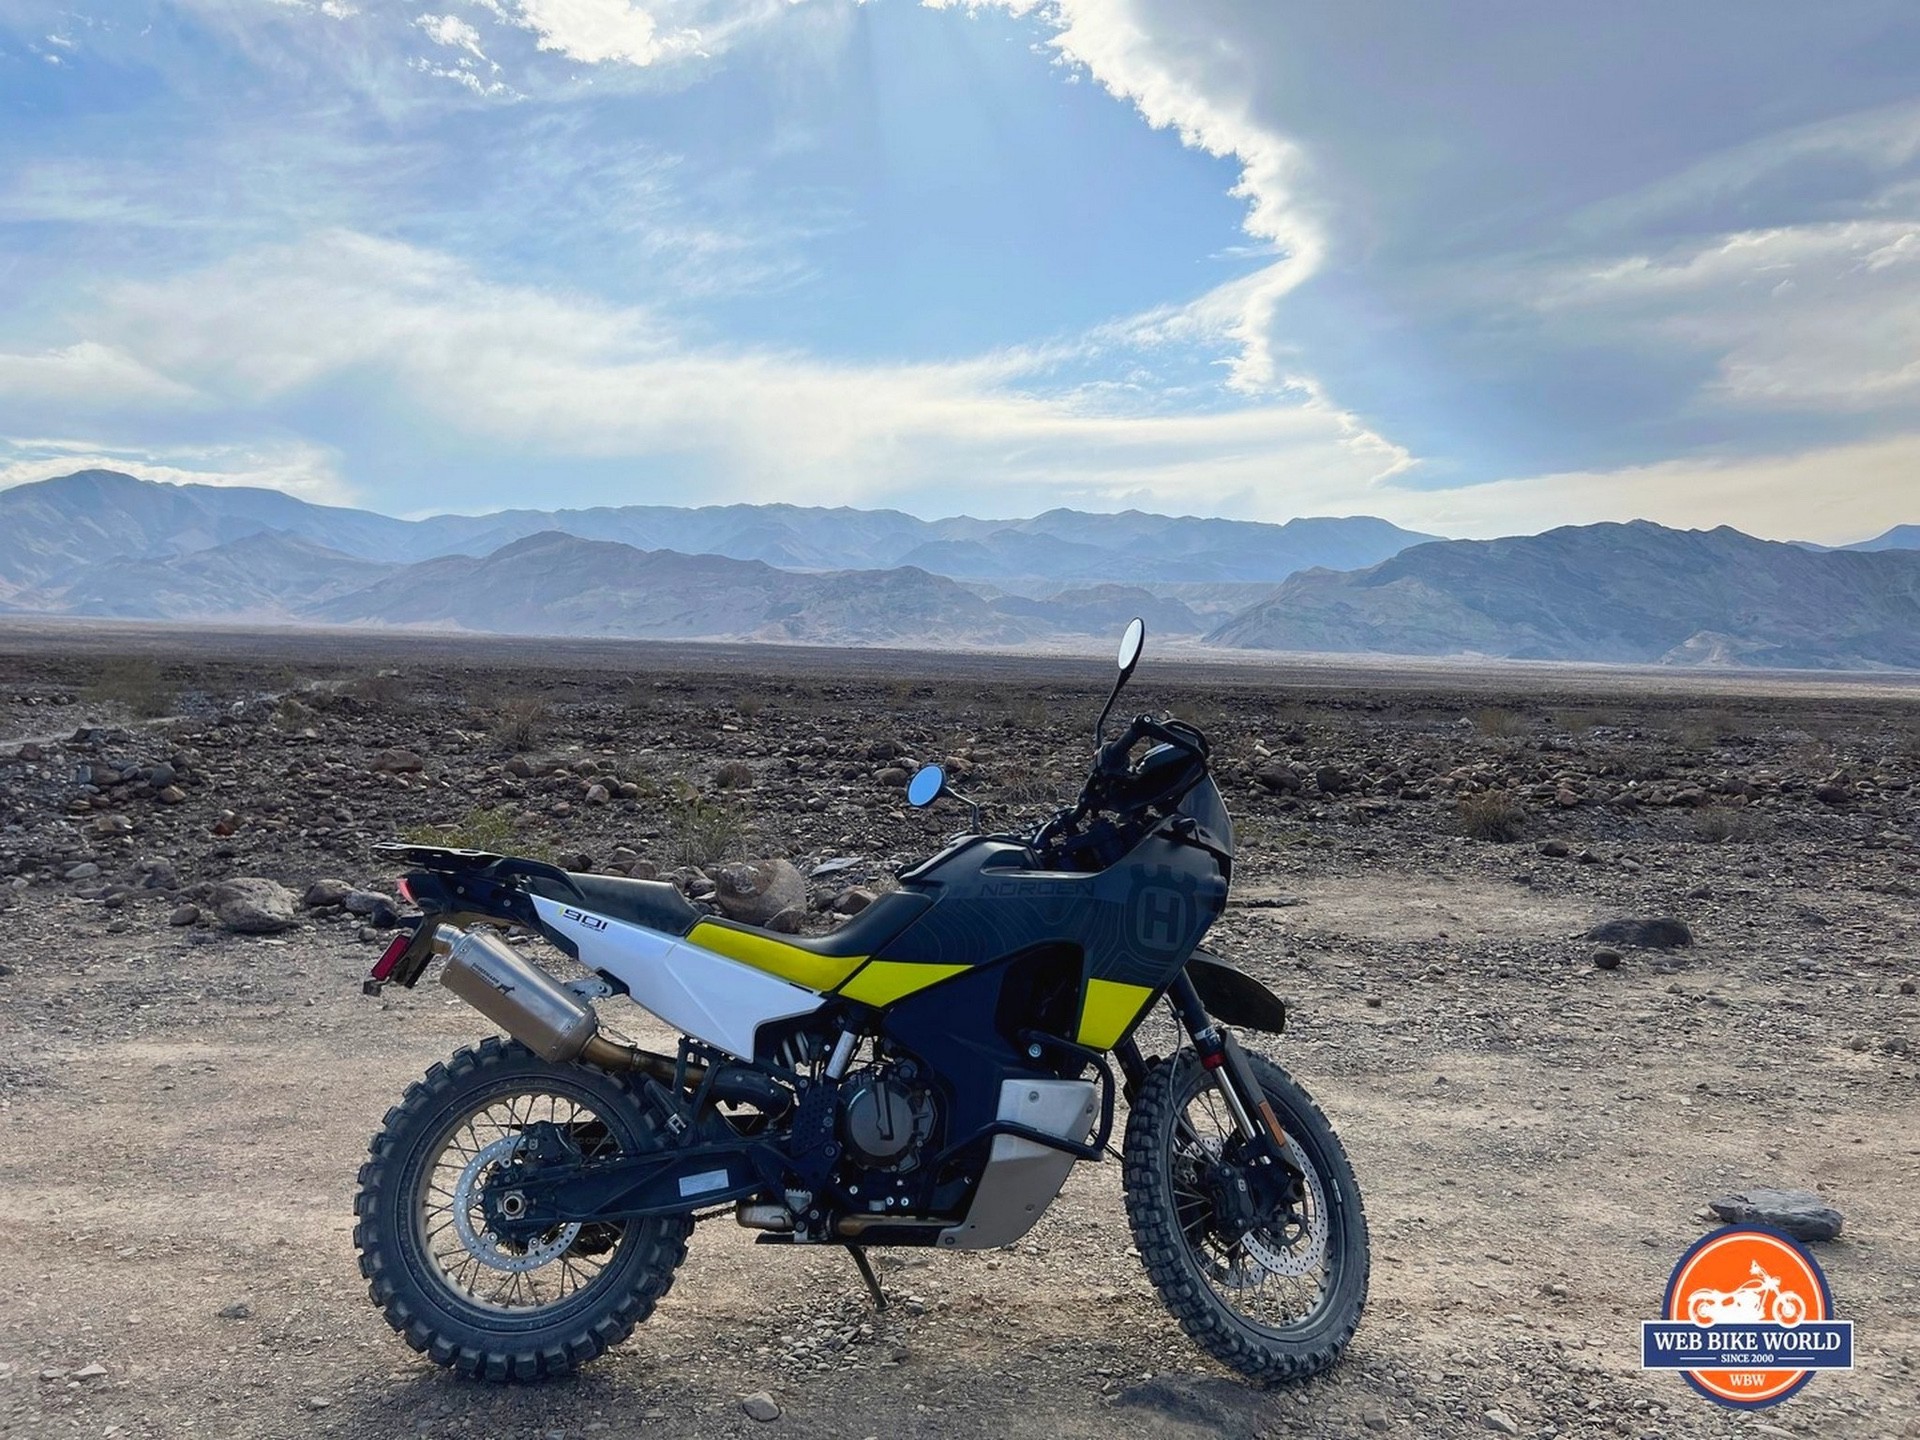 Death Valley is a hell of a place to ride motorcycles.